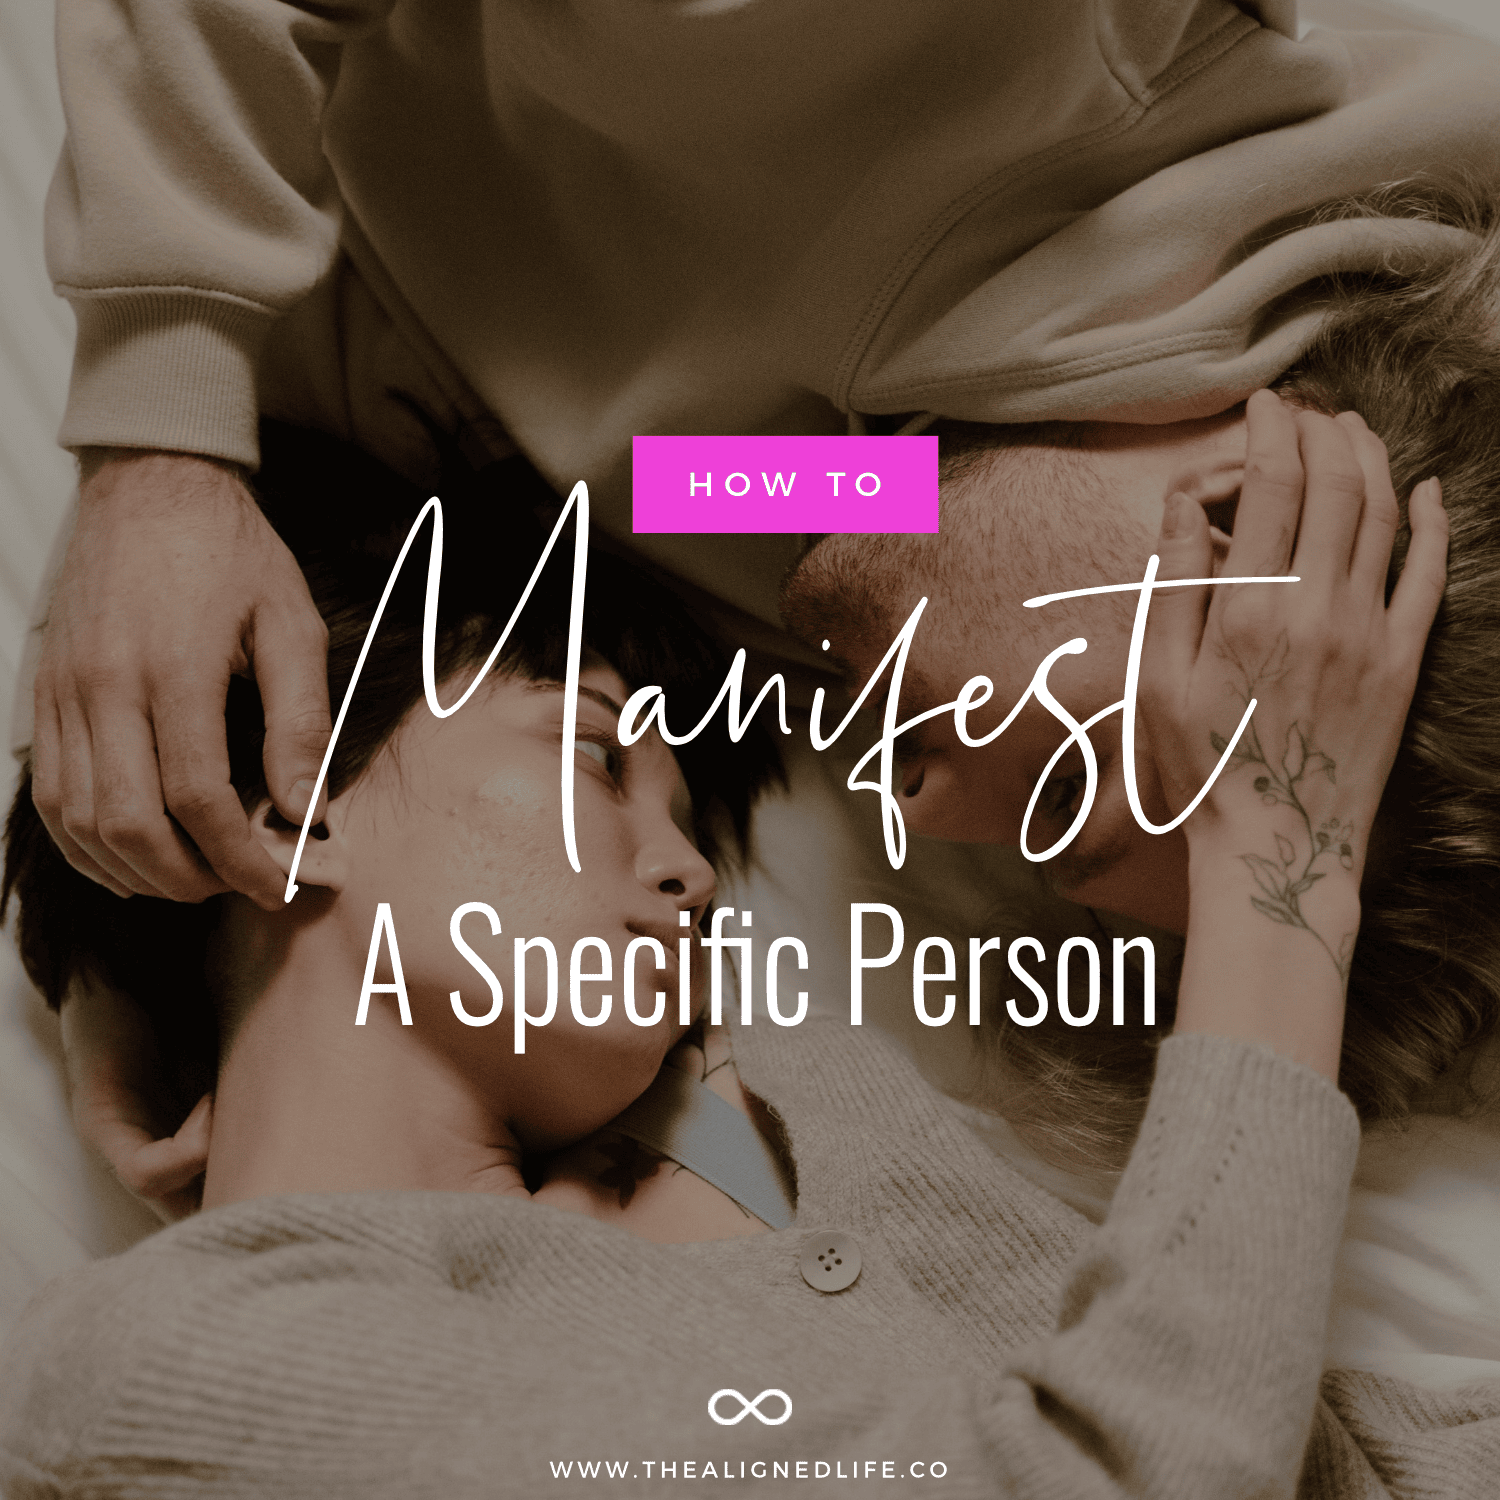 How To Manifest A Specific Person With The Law Of Attraction